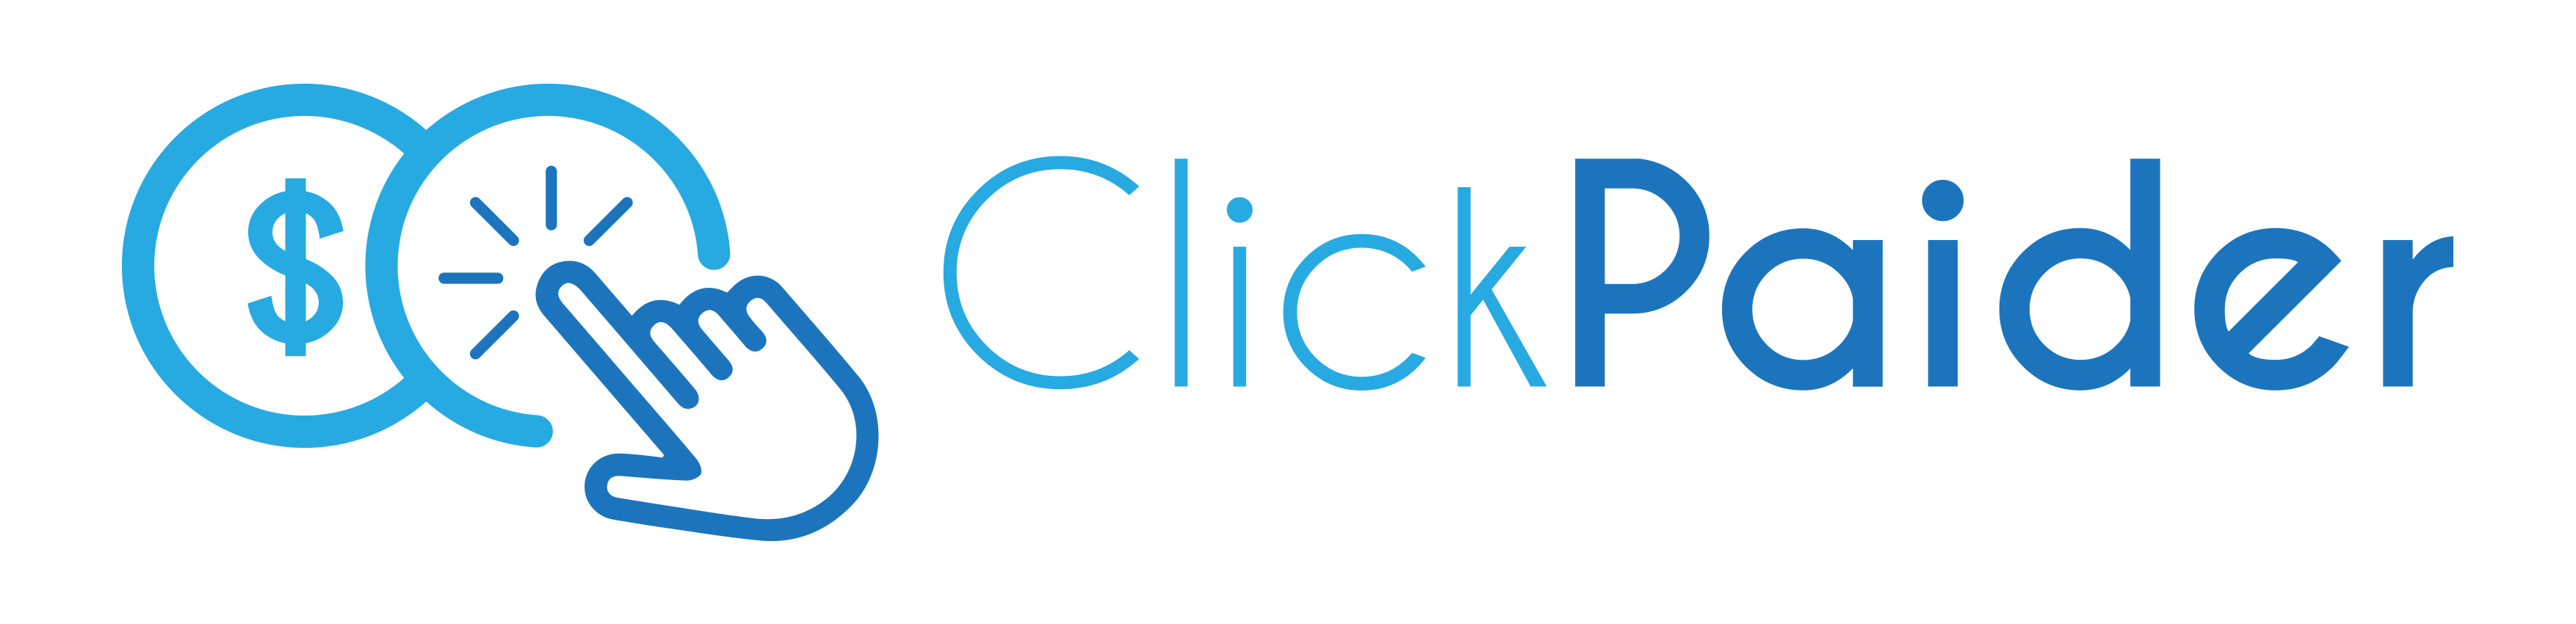 ClickPaider